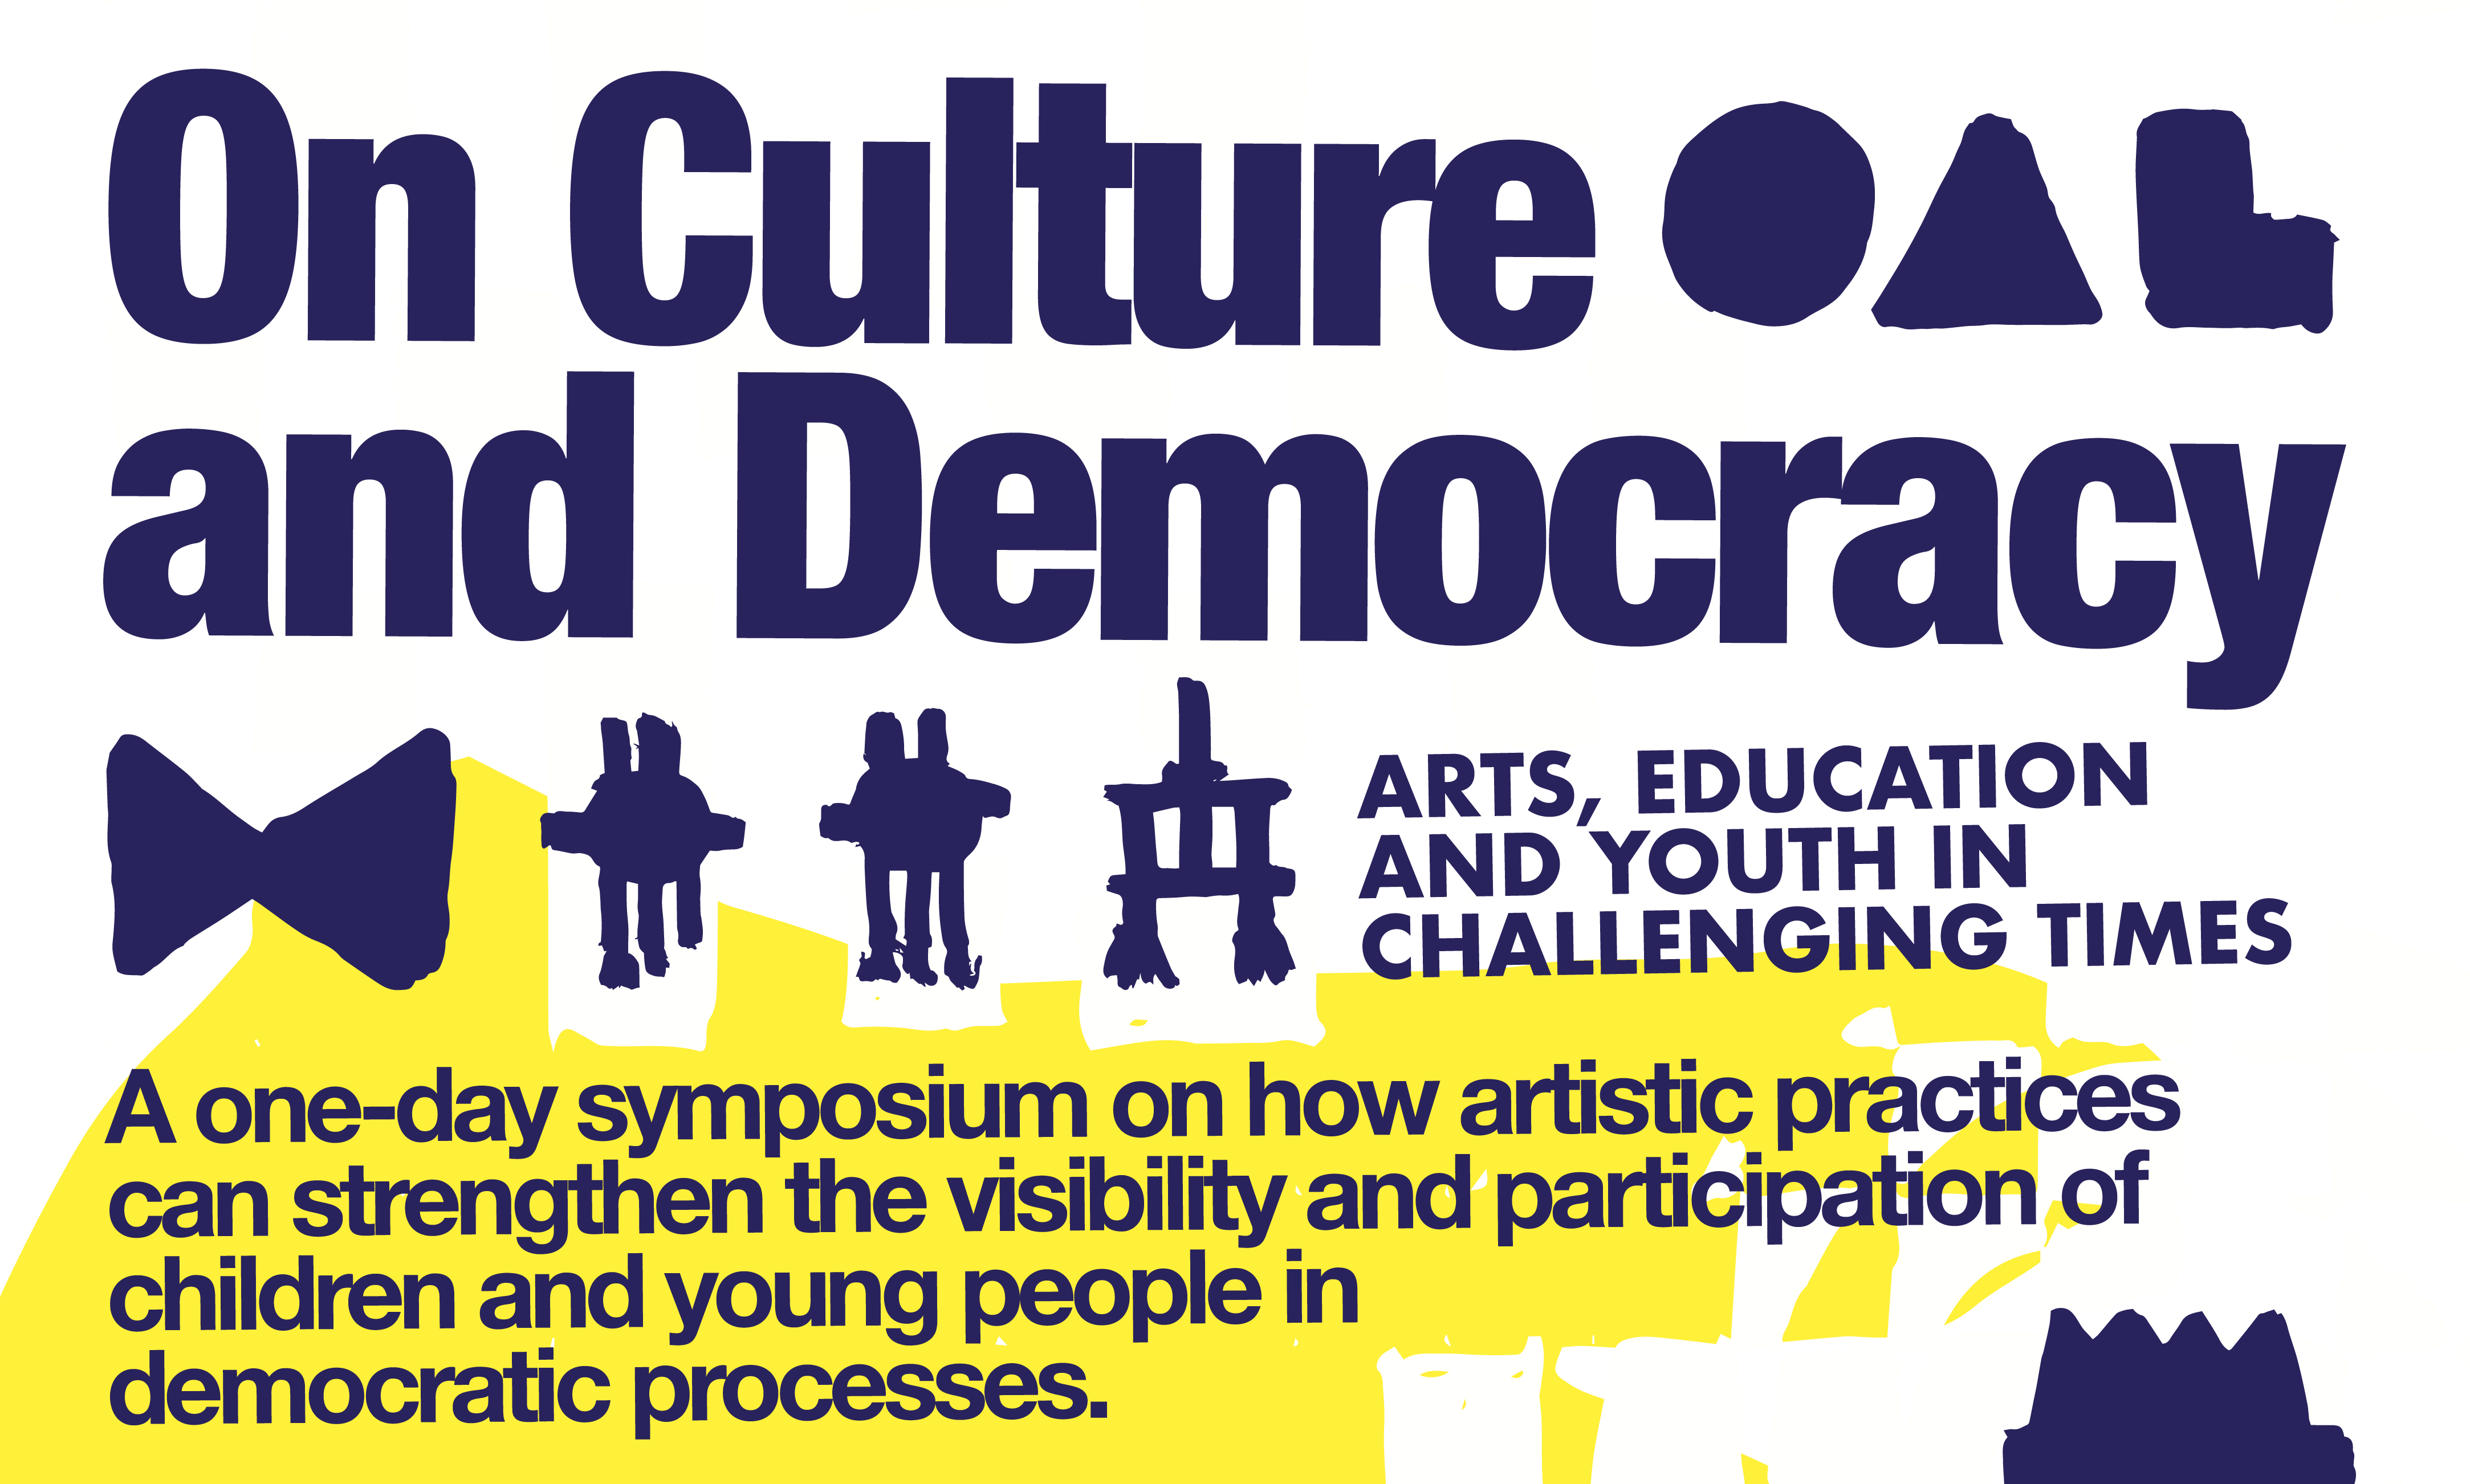 Bild med sammanfattande text på engelska: A one-day symposiu on how artistic practices can strengthen the visibility and participation of children and young people in democratic processes